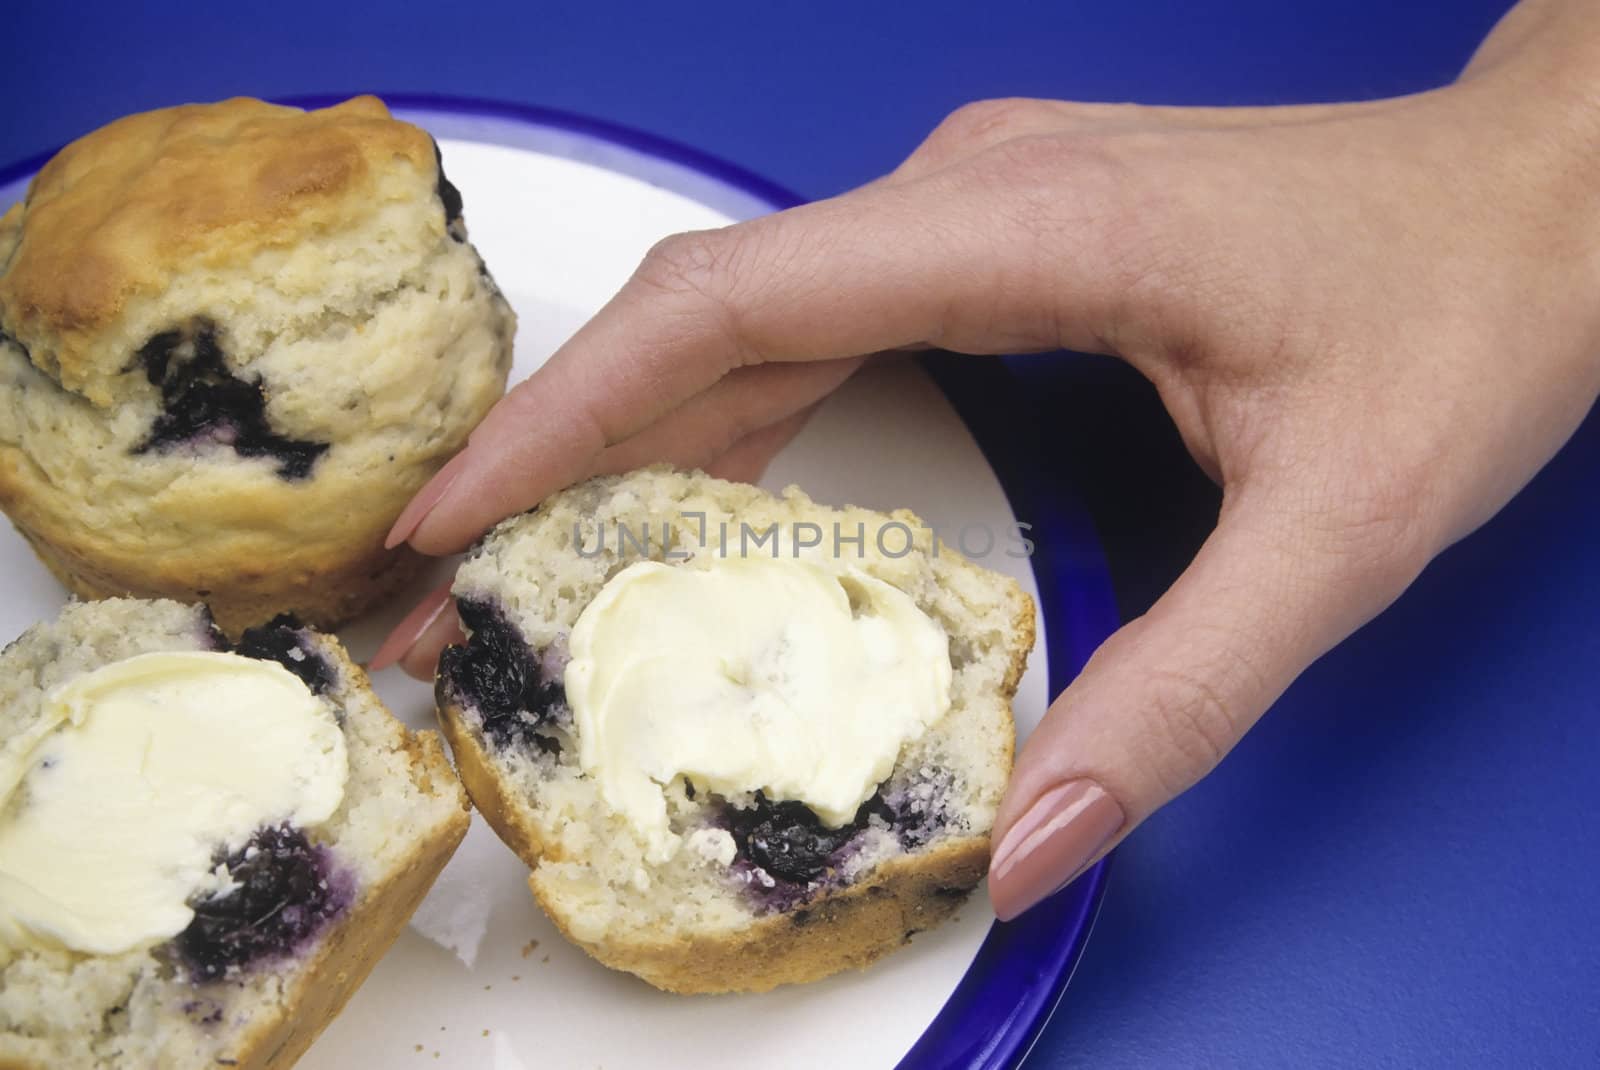 Hand reaching for a buttered blueberry mufin